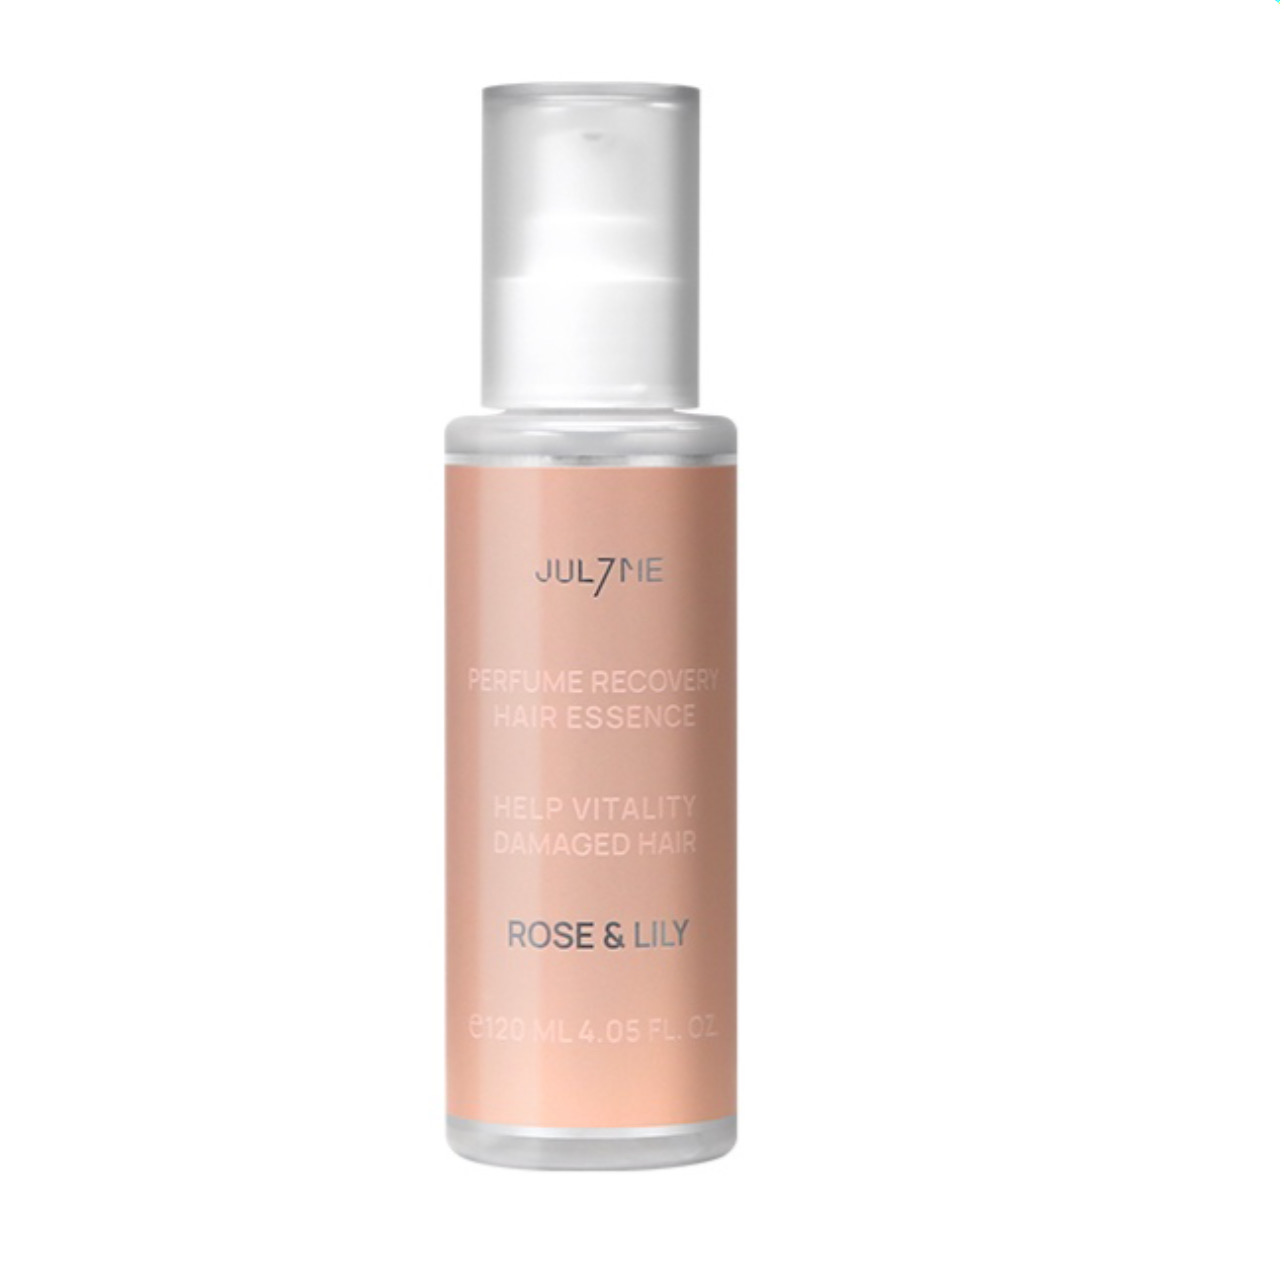 JULYME Perfume Recovery Hair Essence - 120ml -Rose & Lily